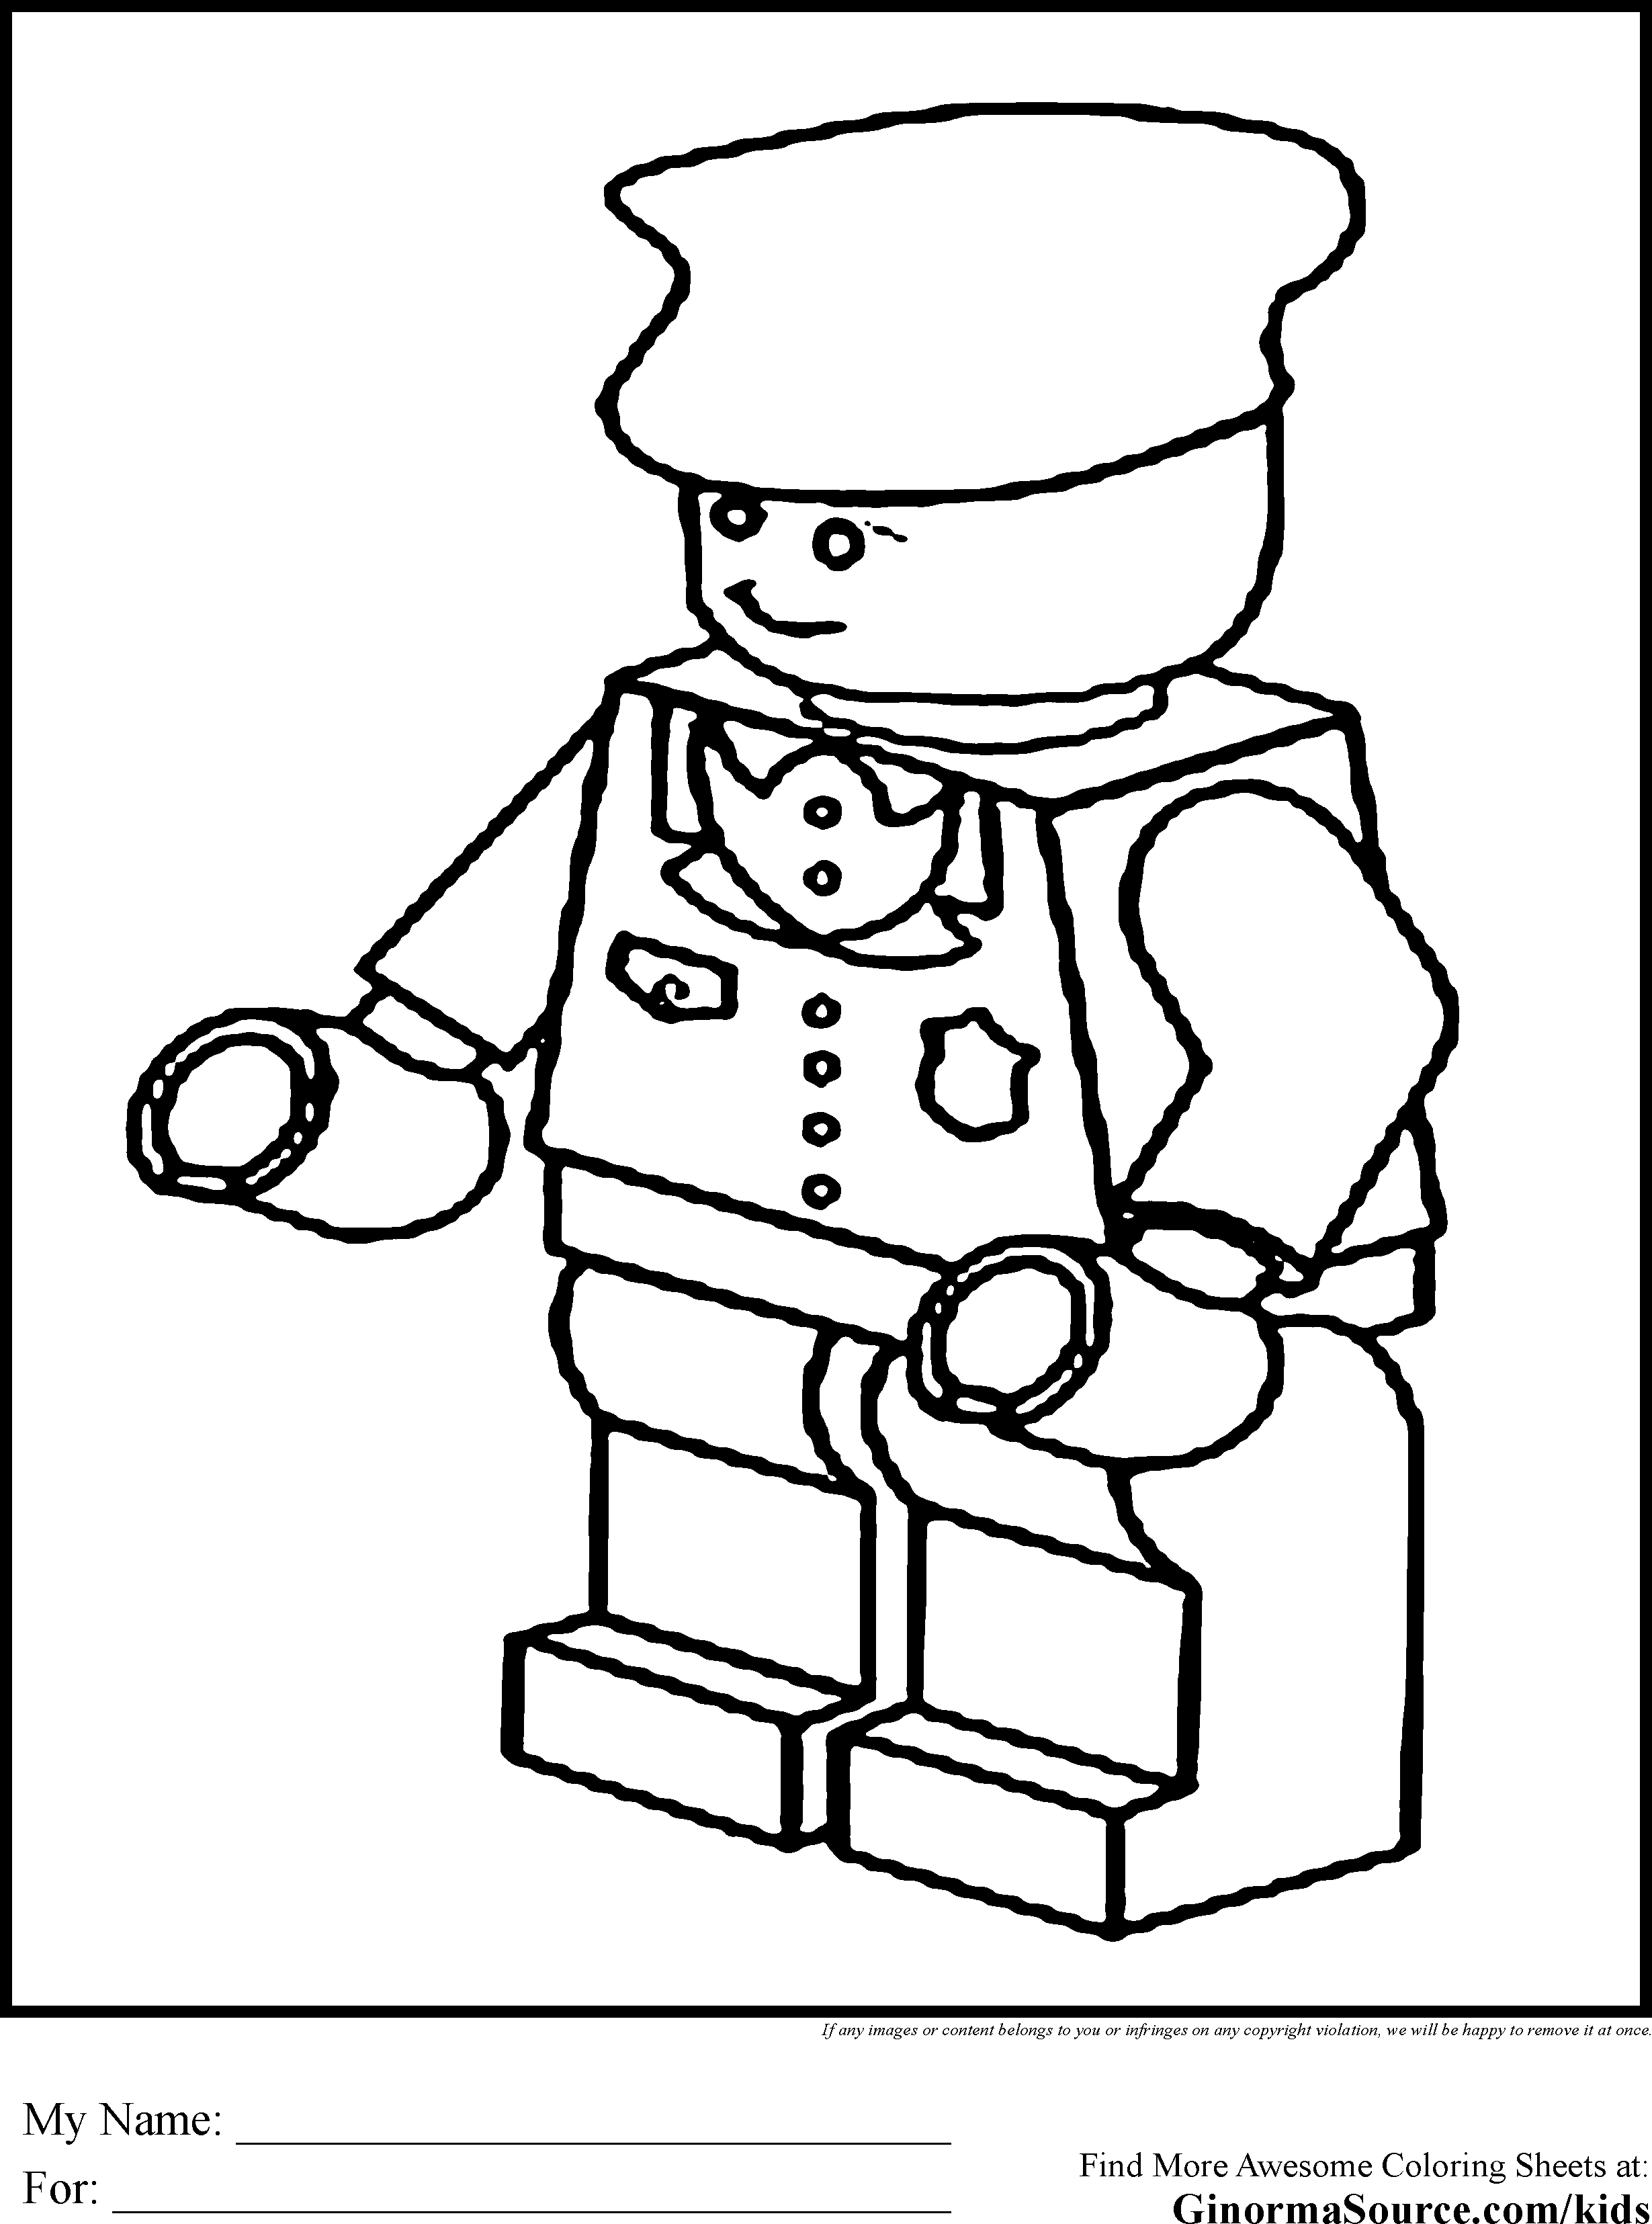 p g lego coloring pages - photo #19